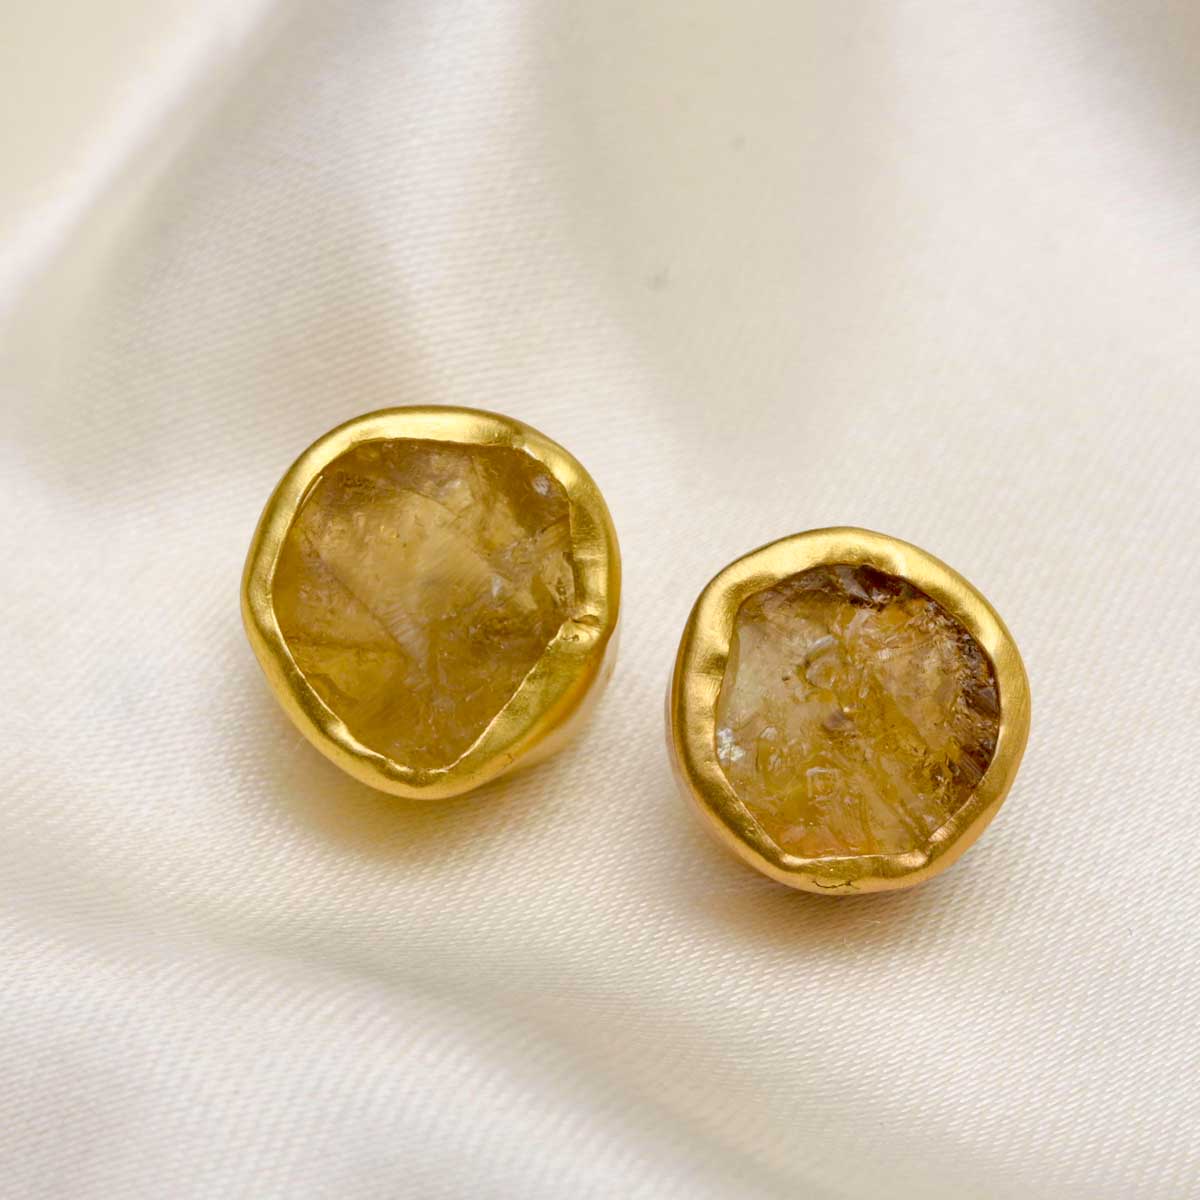 The Spirited Gold Stud Earrings with Citrine